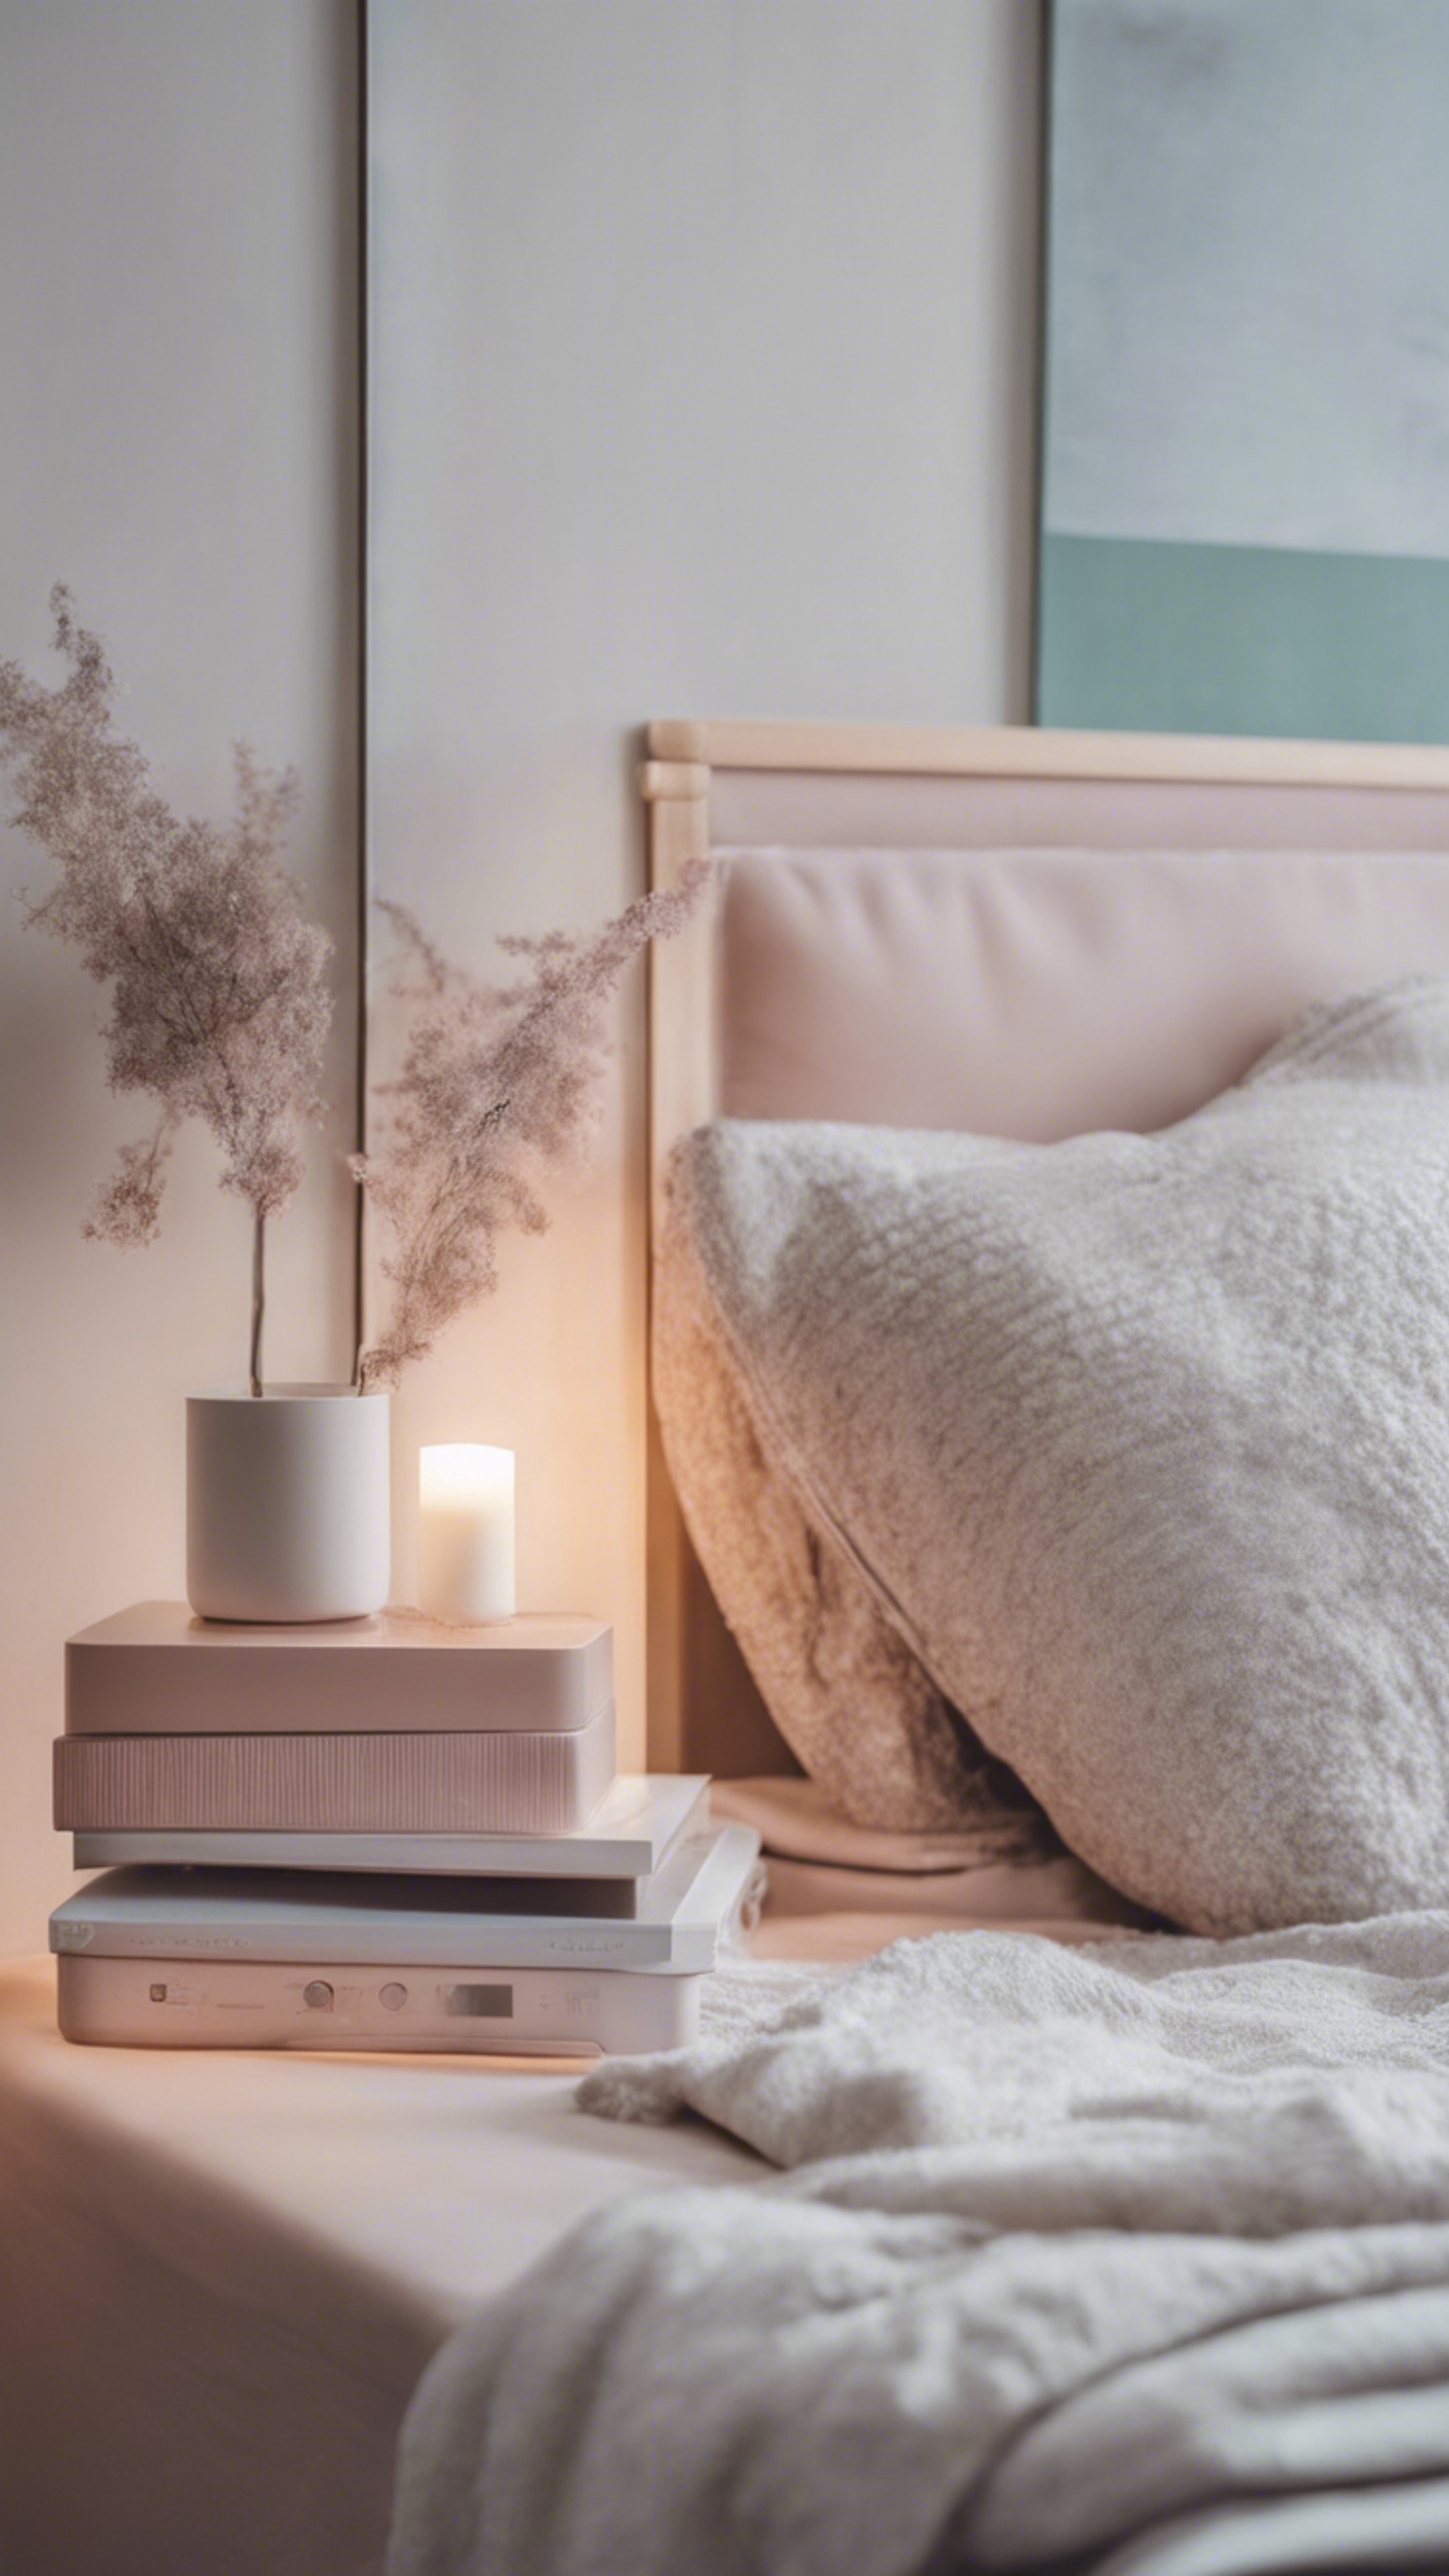 A modern minimalist bedroom in pastel hues with cozy blankets and a stylish bedside table. Tapet[e12df14007a0419d89d8]